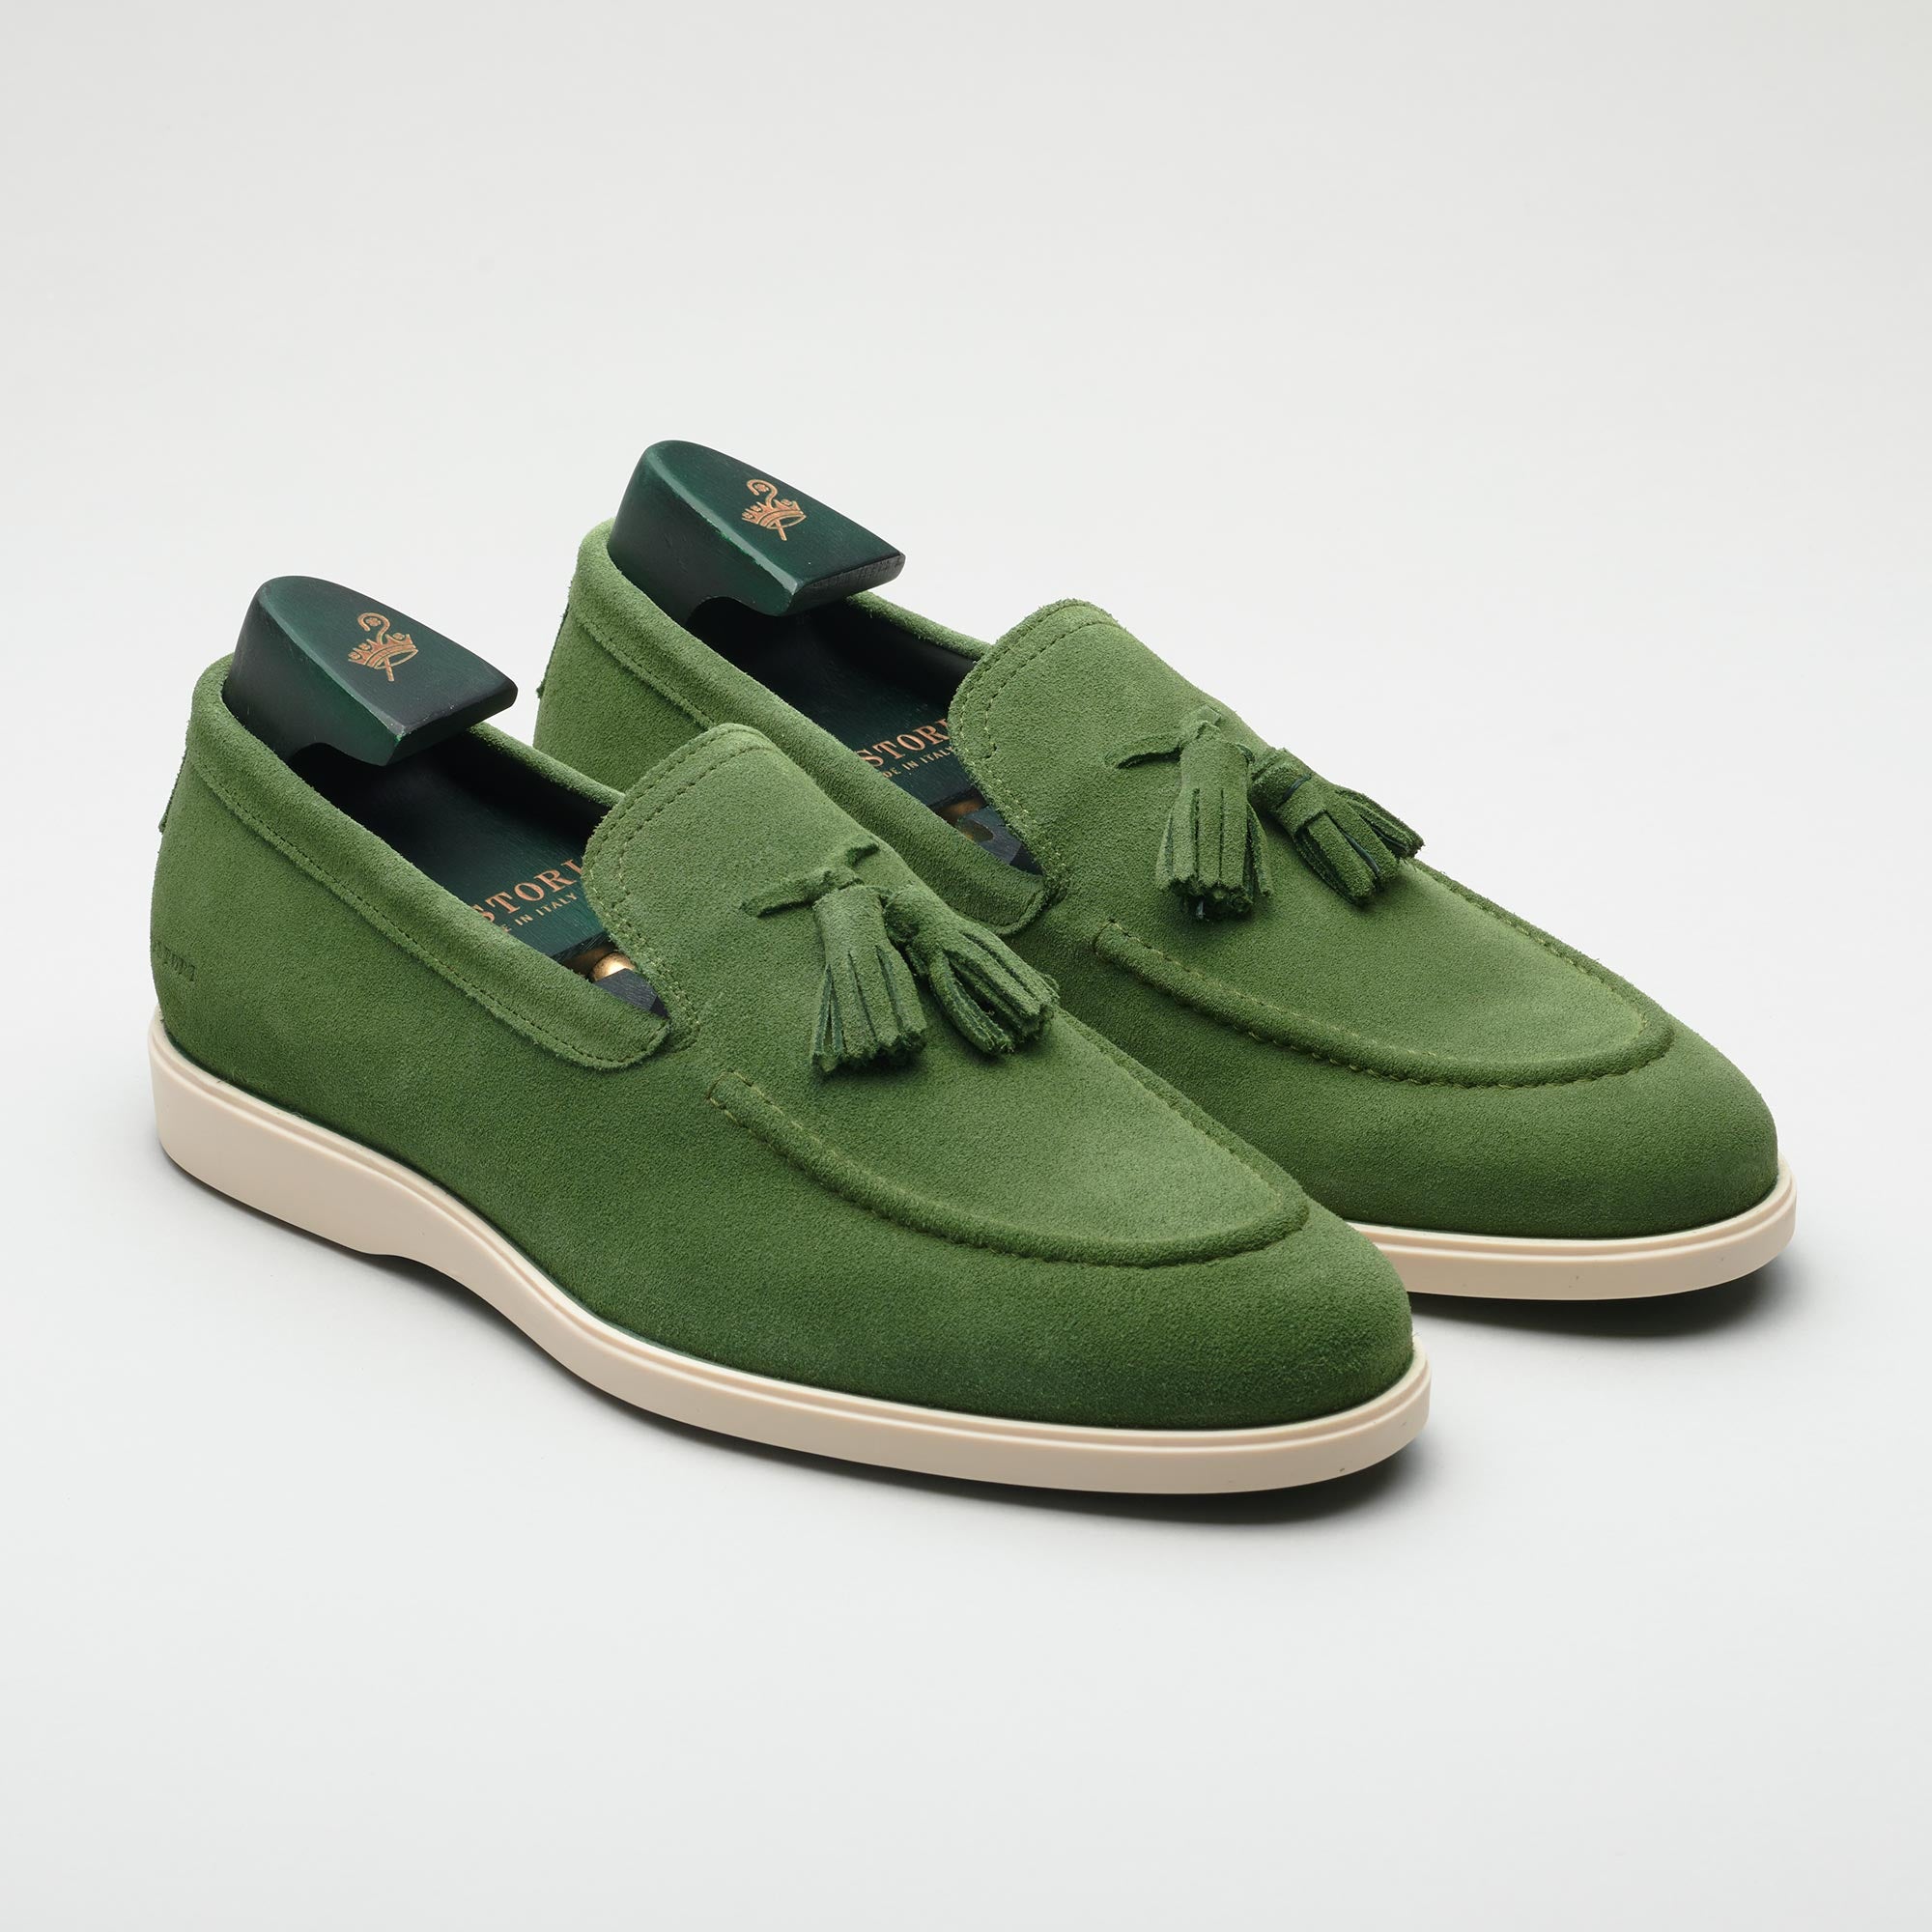 mens suede loafer green, handmade, made in italy